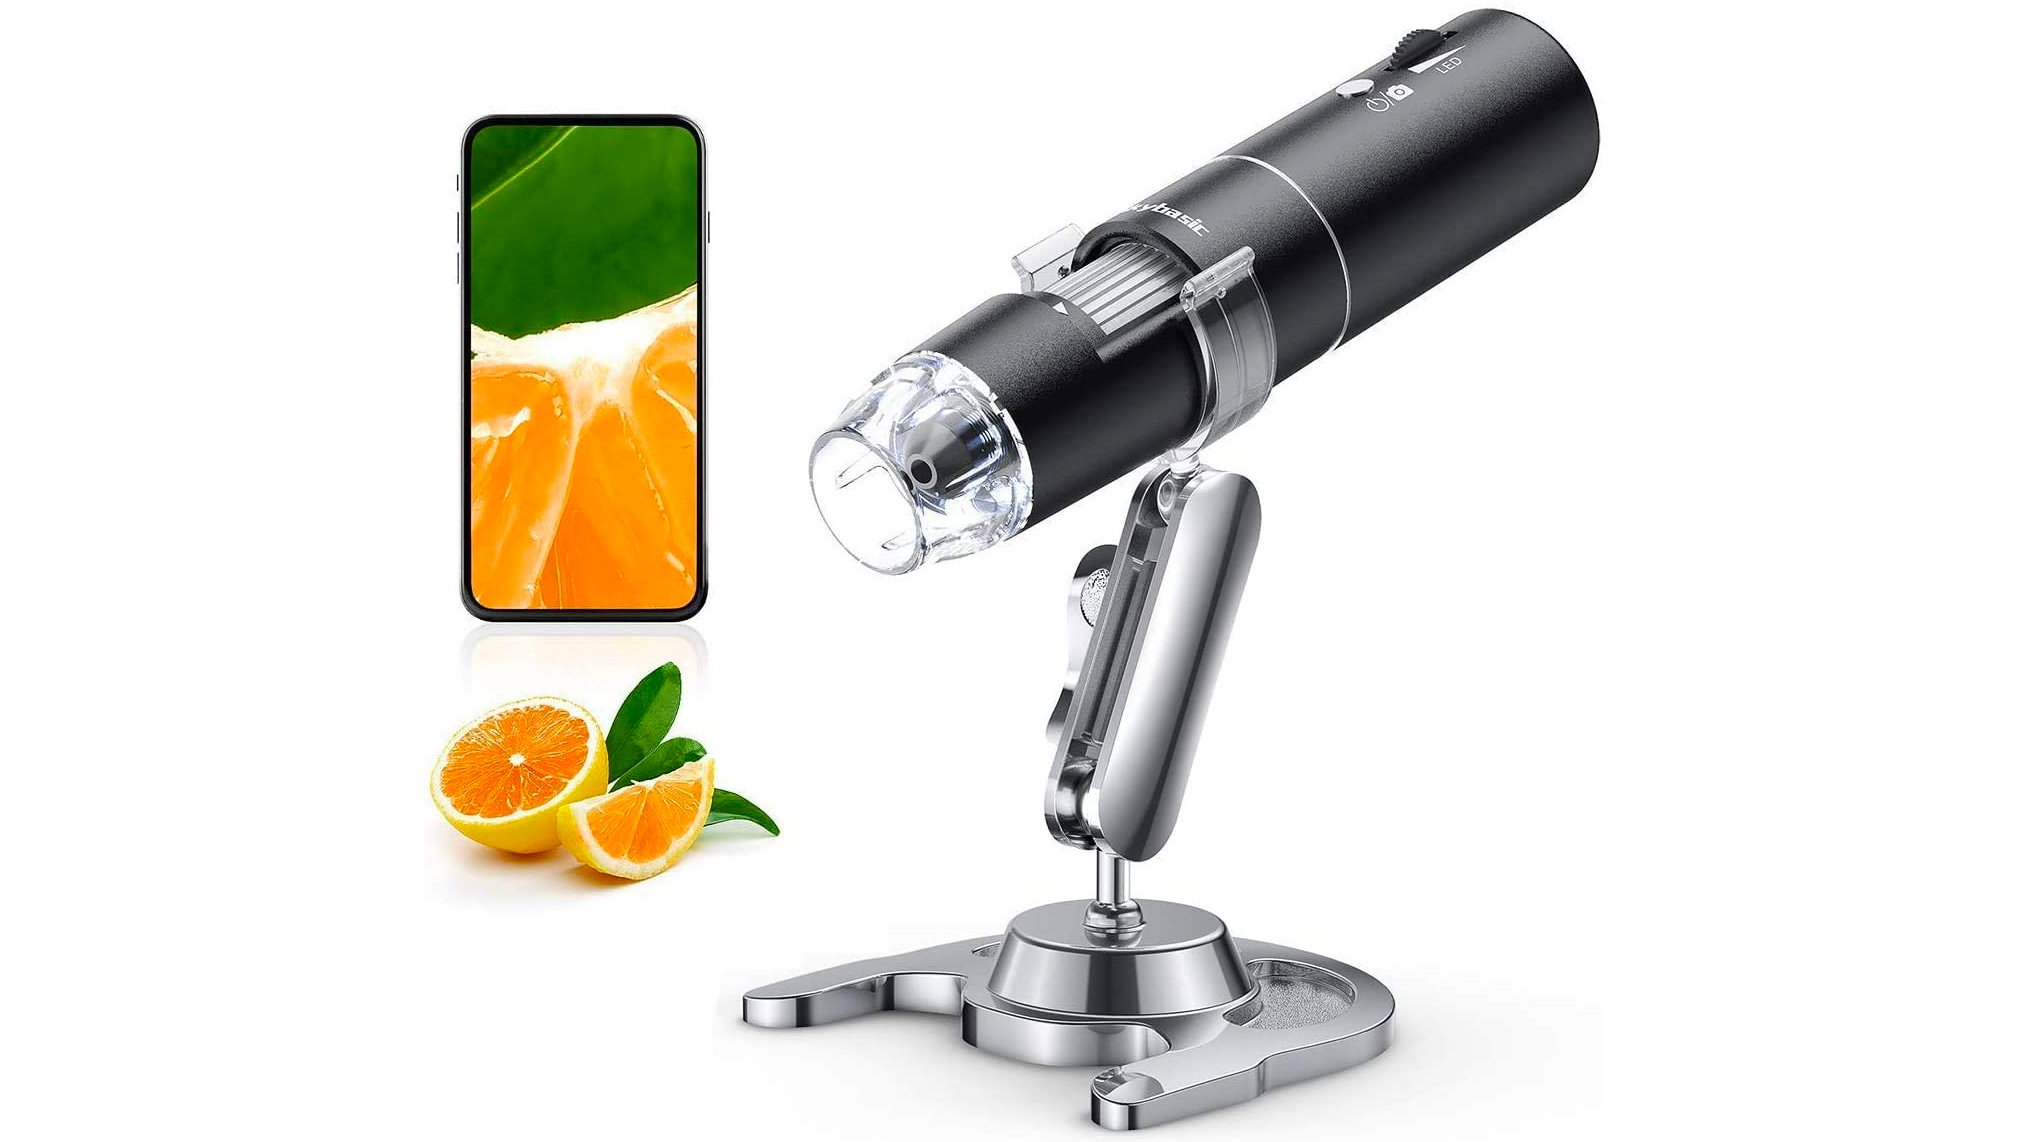 SkyBasic wireless digital microscope for kids - a great, tech-integrated option